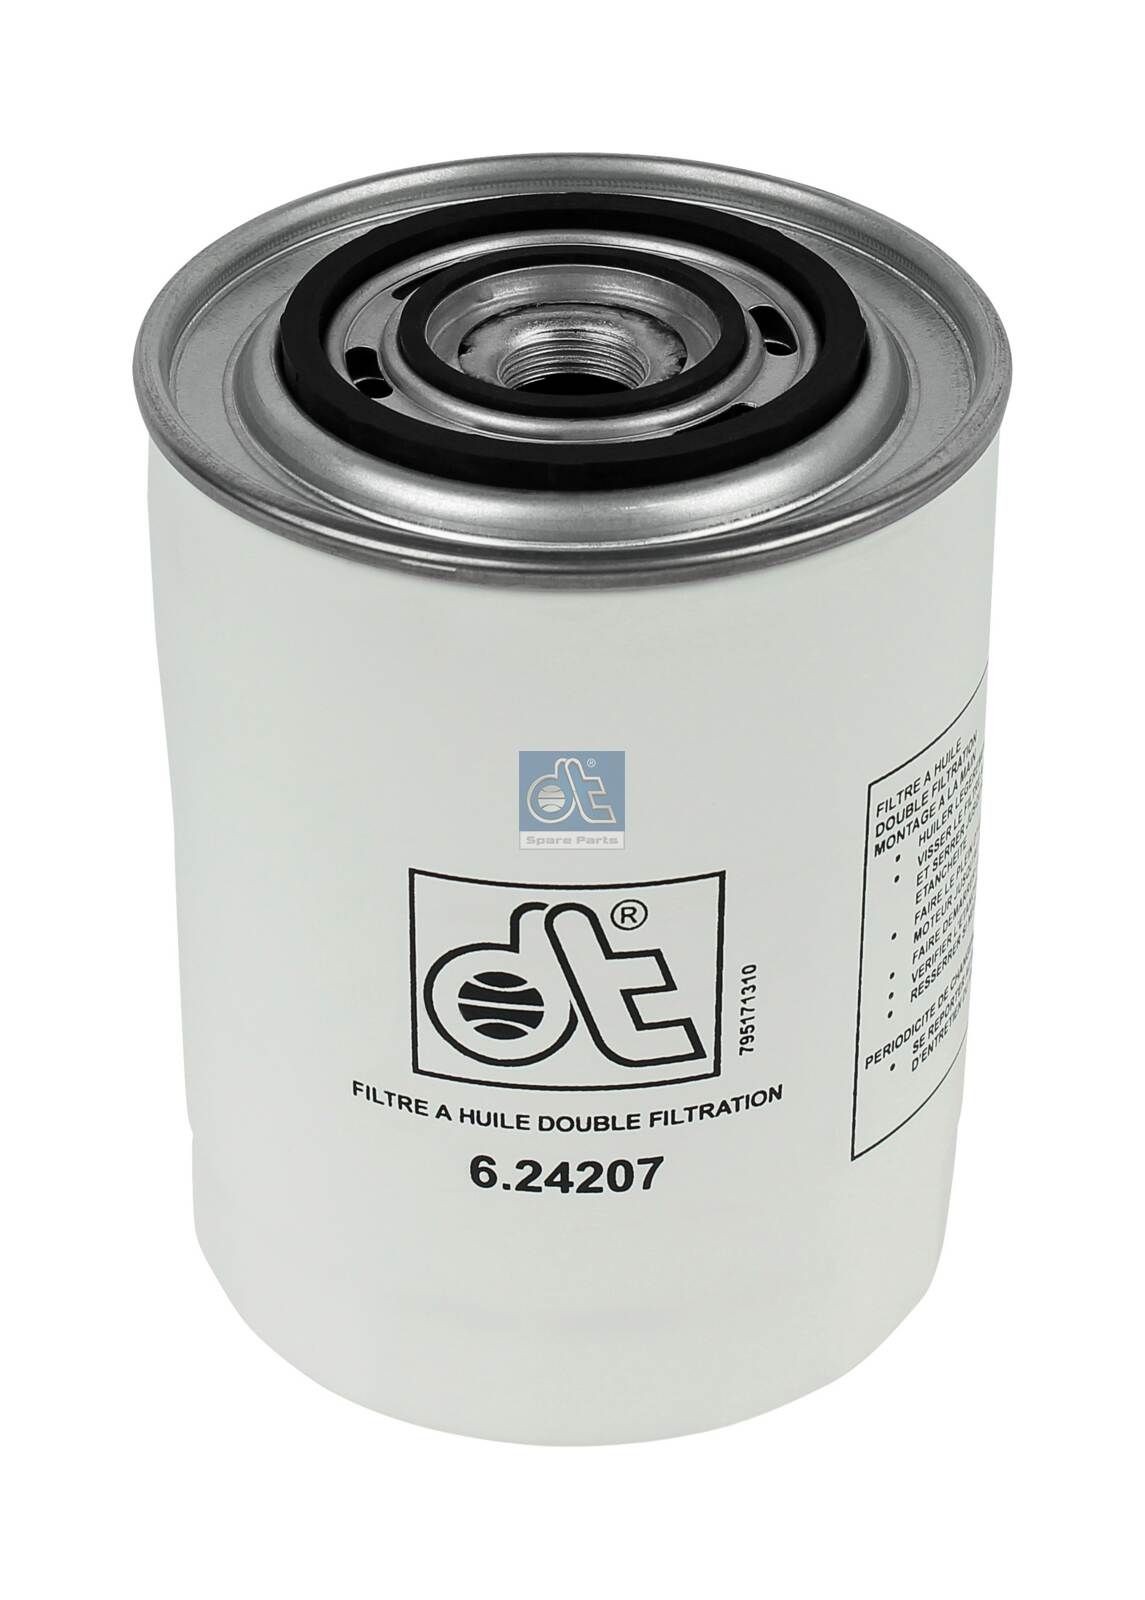 WP 1144 DT Spare Parts 6.24207 Oil filter 5025091